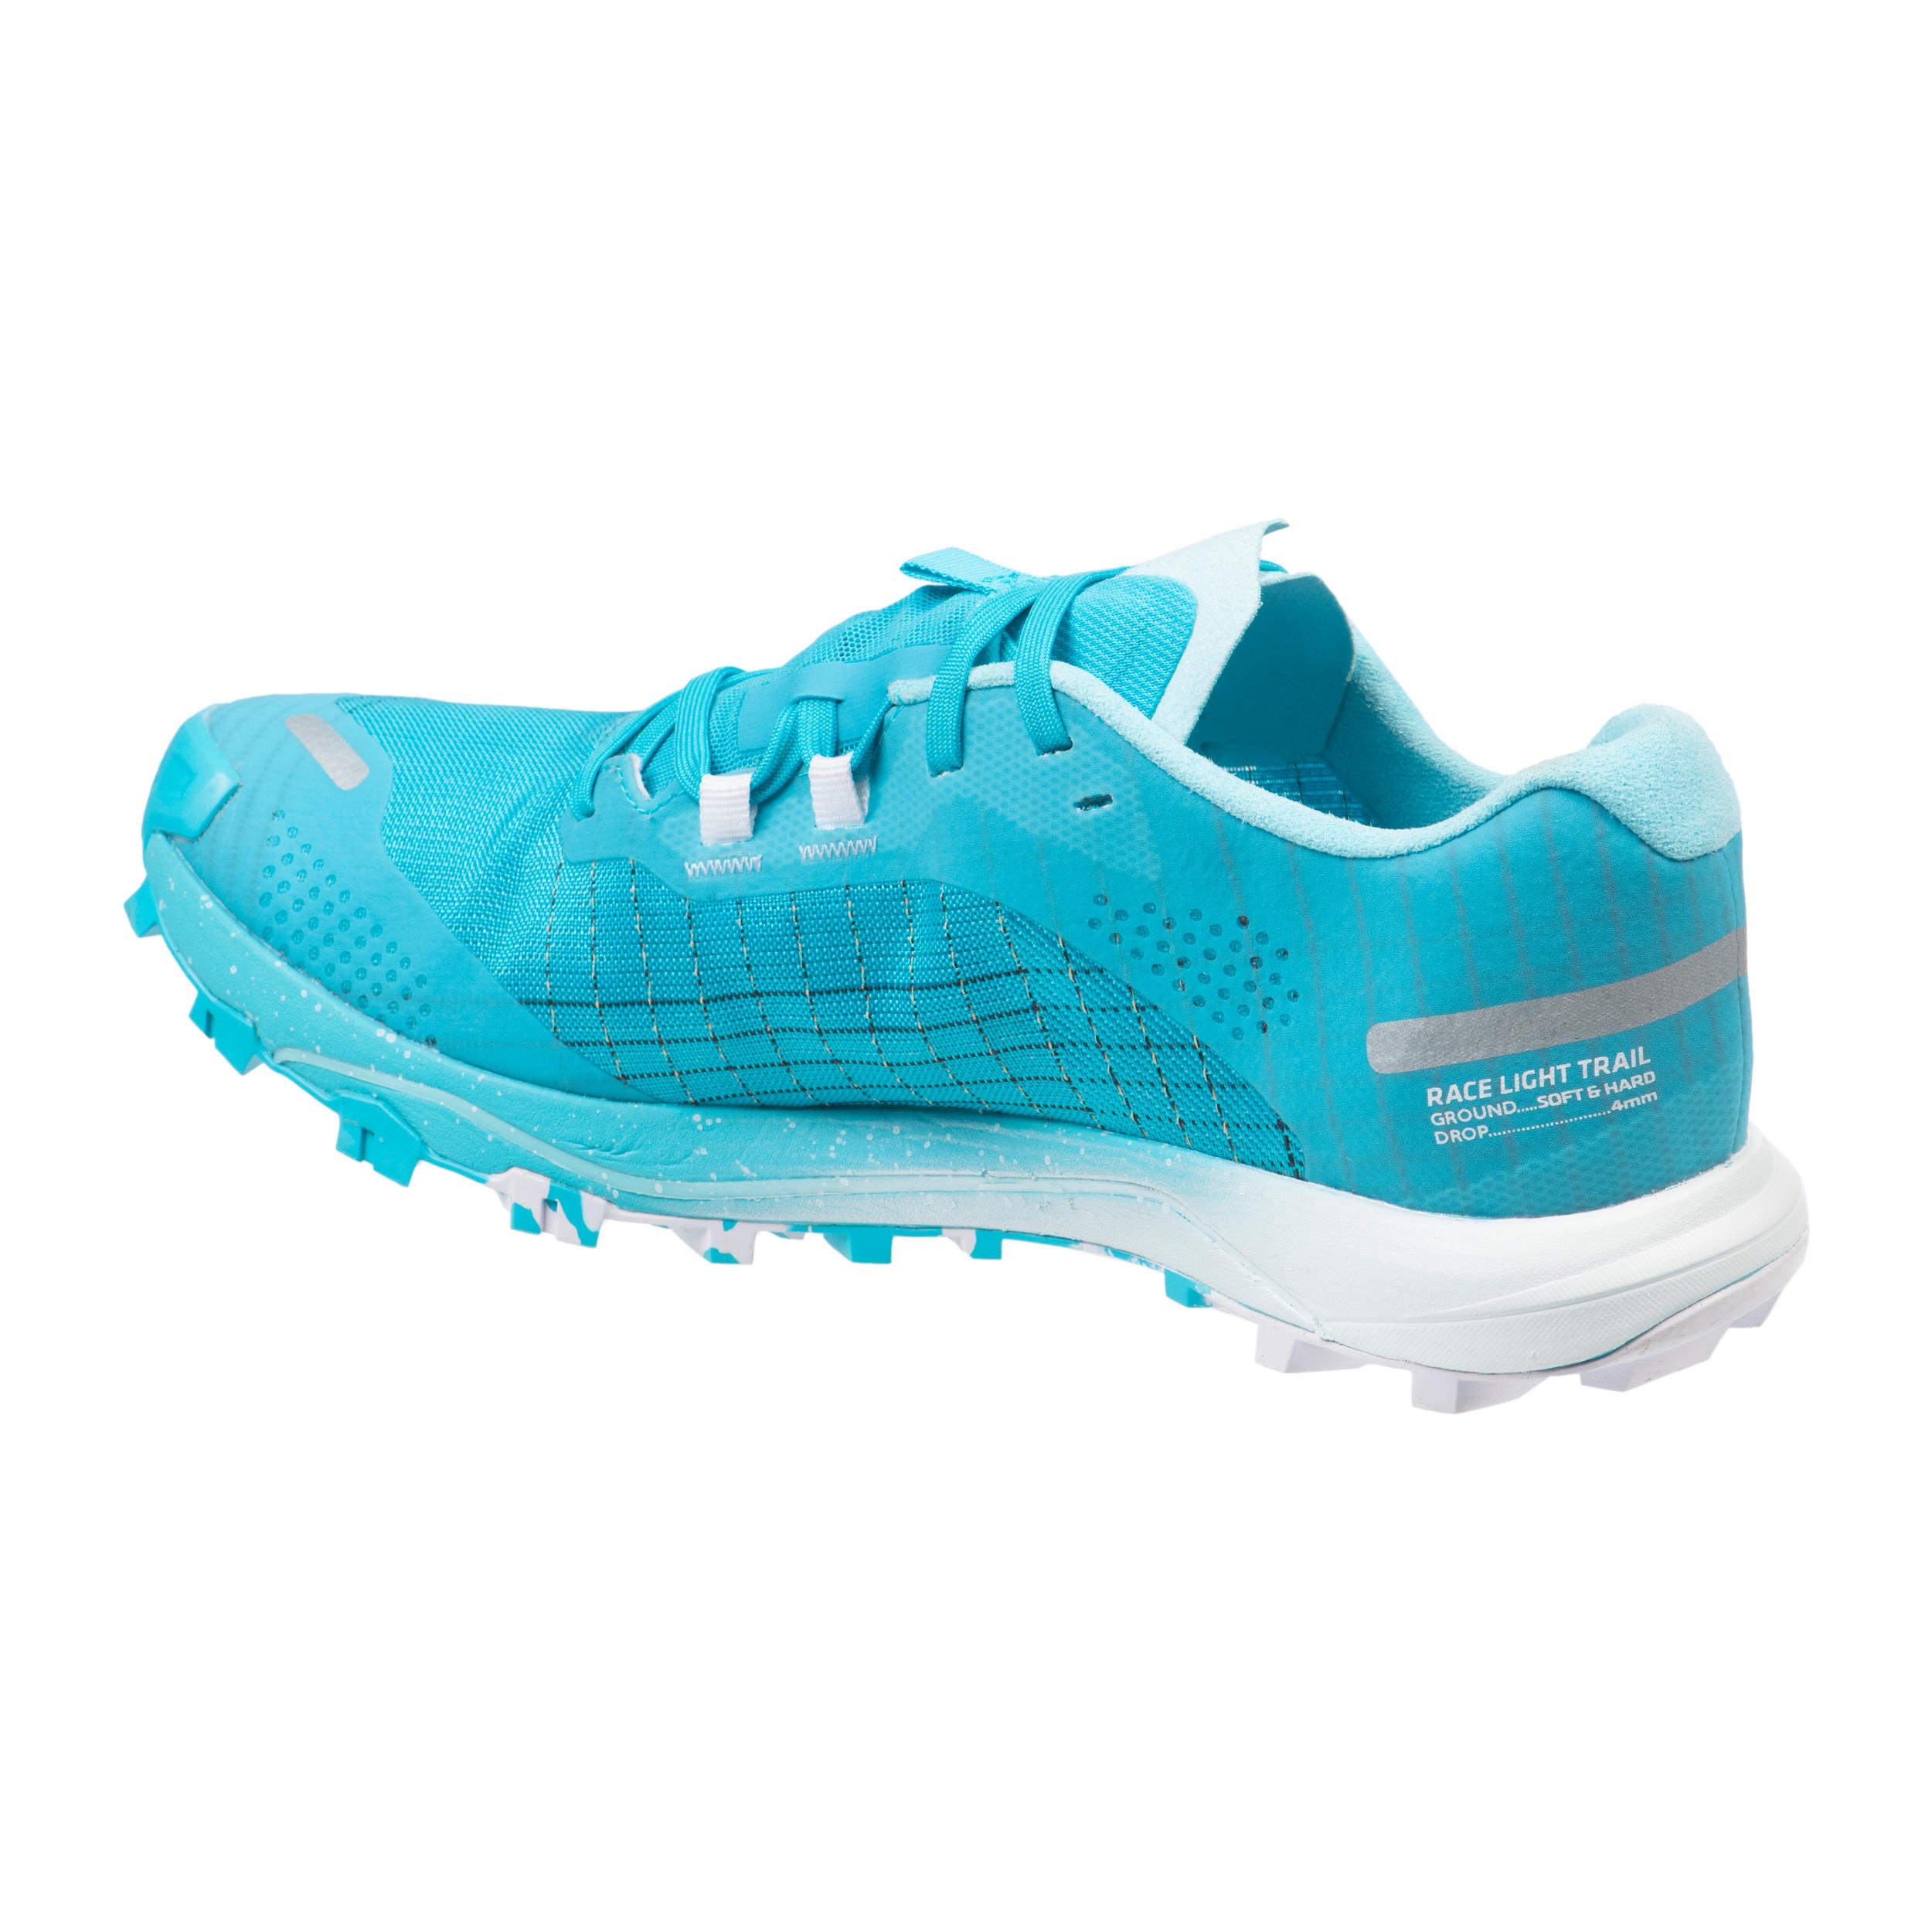 Race Light Women's Trail Running Shoes - sky blue and white 6/14